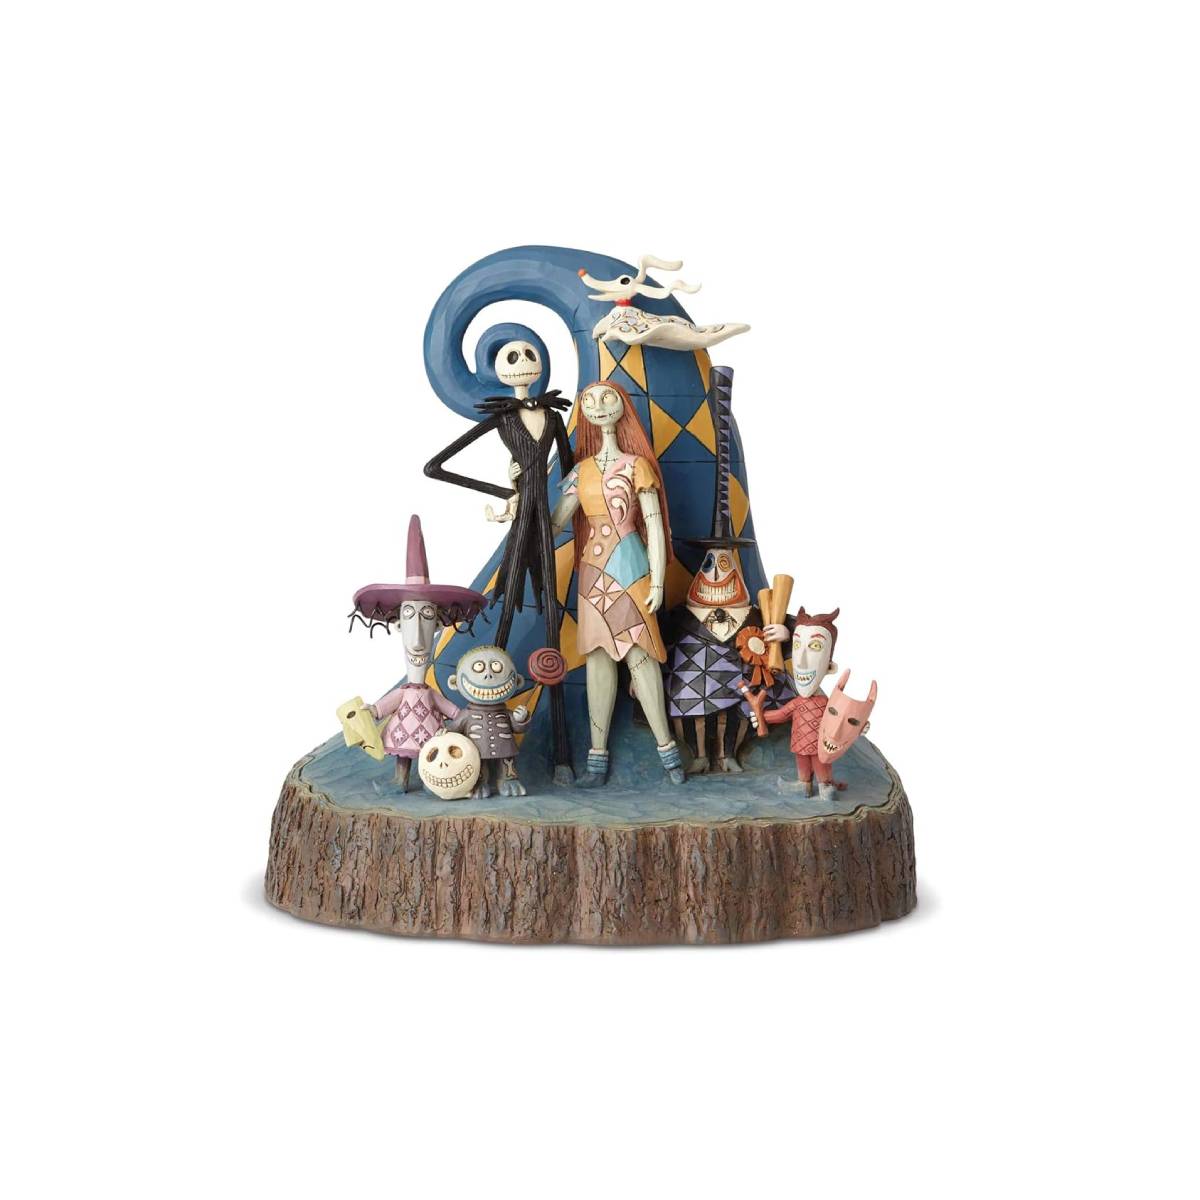 ENESCO DISNEY TRADITIONS BY JIM SHORE NIGHTMARE BEFORE CHRISTMAS CARVED BY HEART